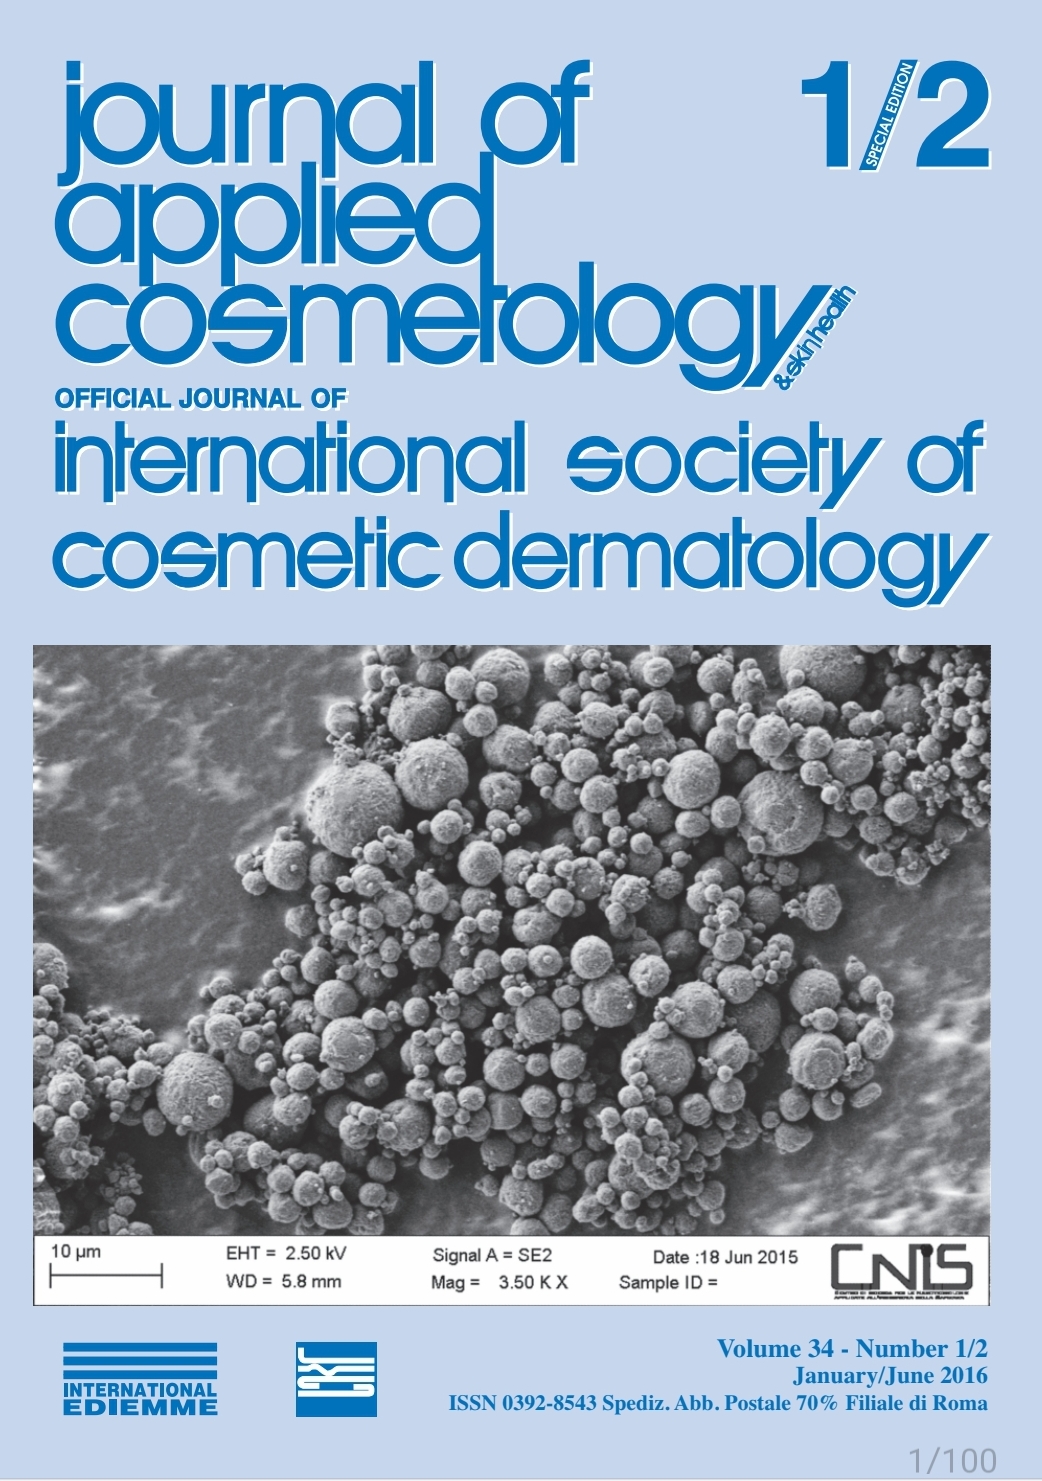 					View Vol. 34 No. 1/2 (2016): Journal of Applied Cosmetology
				